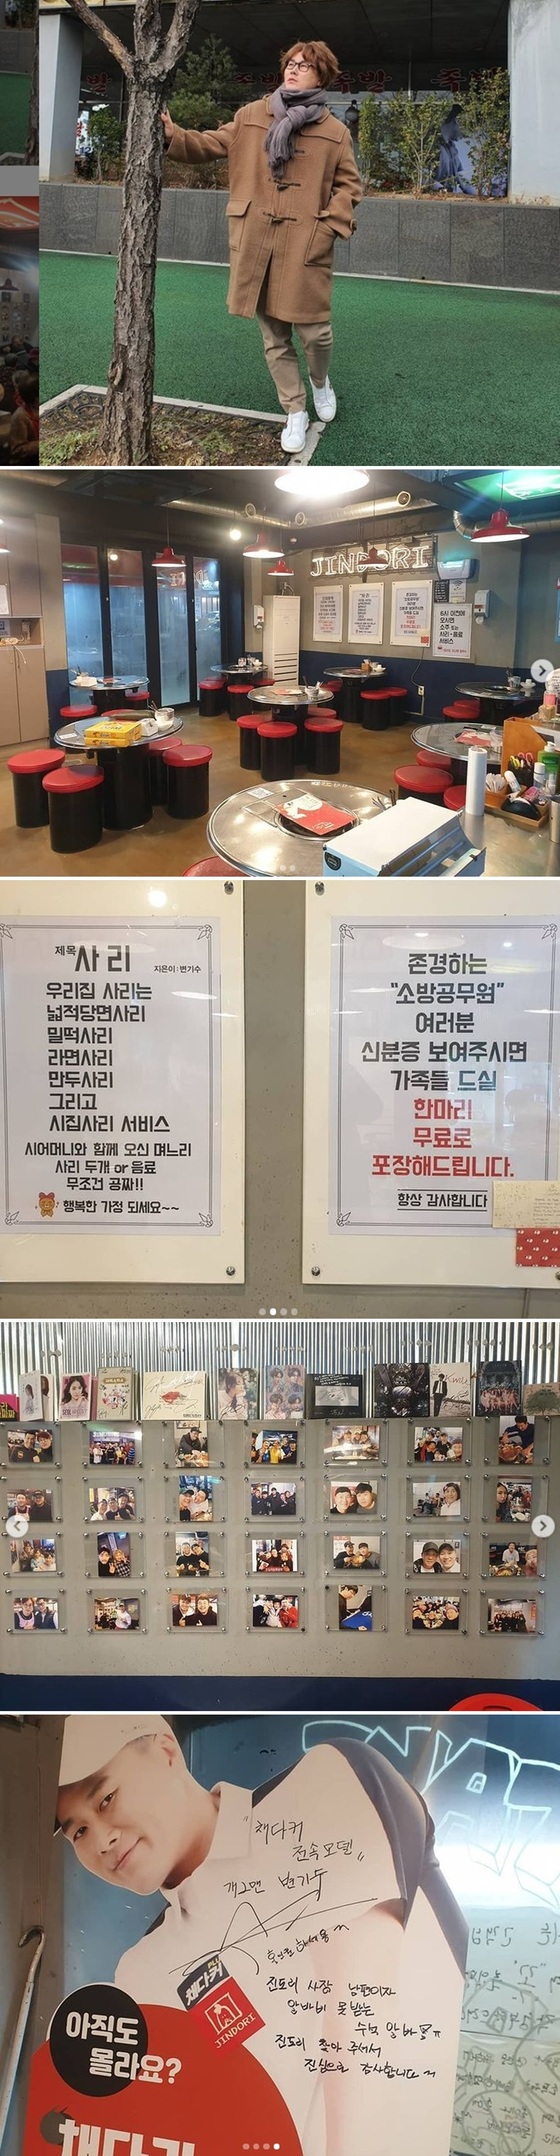 Following Hong Seok-cheon, Byeon Gi-soo, the chicken-bokkeum-tang restaurant closed this time.